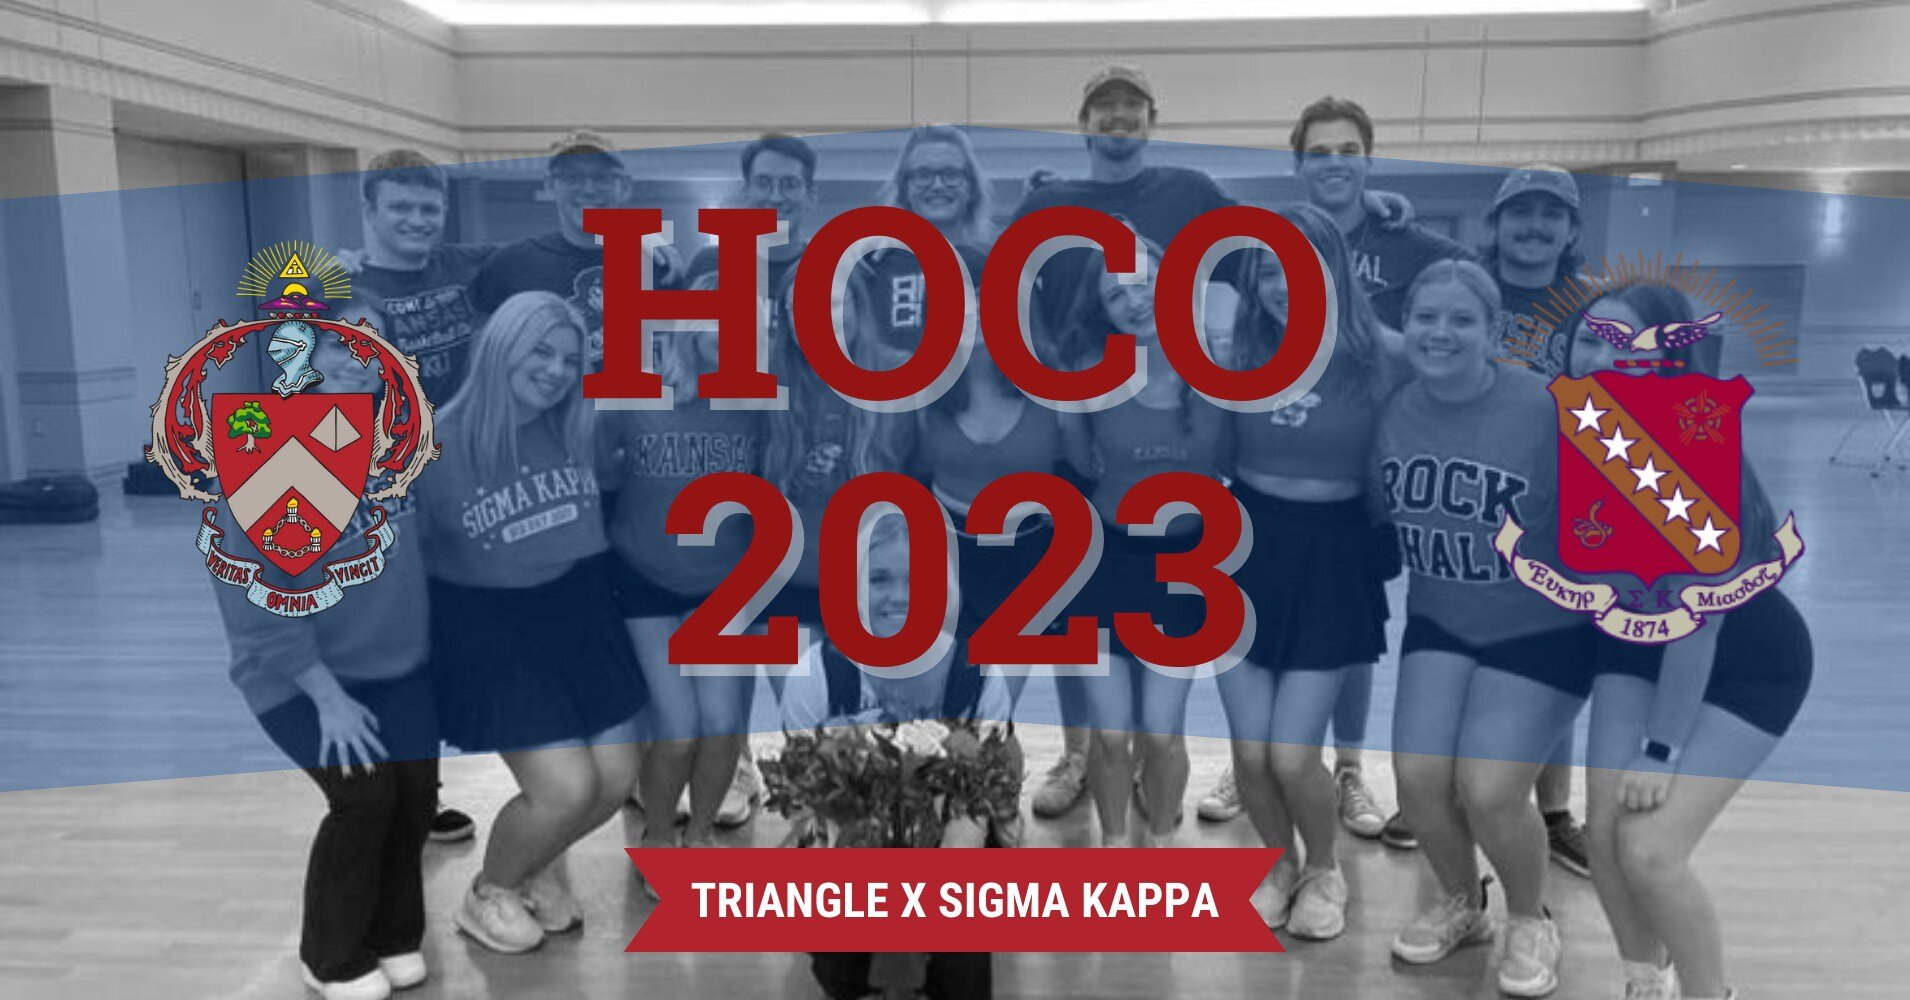 Last week we had such a fun time during 2023's Homecoming, celebrating the origins of the Rock Chalk chant and KU's rich history. Huge thank you to @kusigmakappa who we had the pleasure of working with!